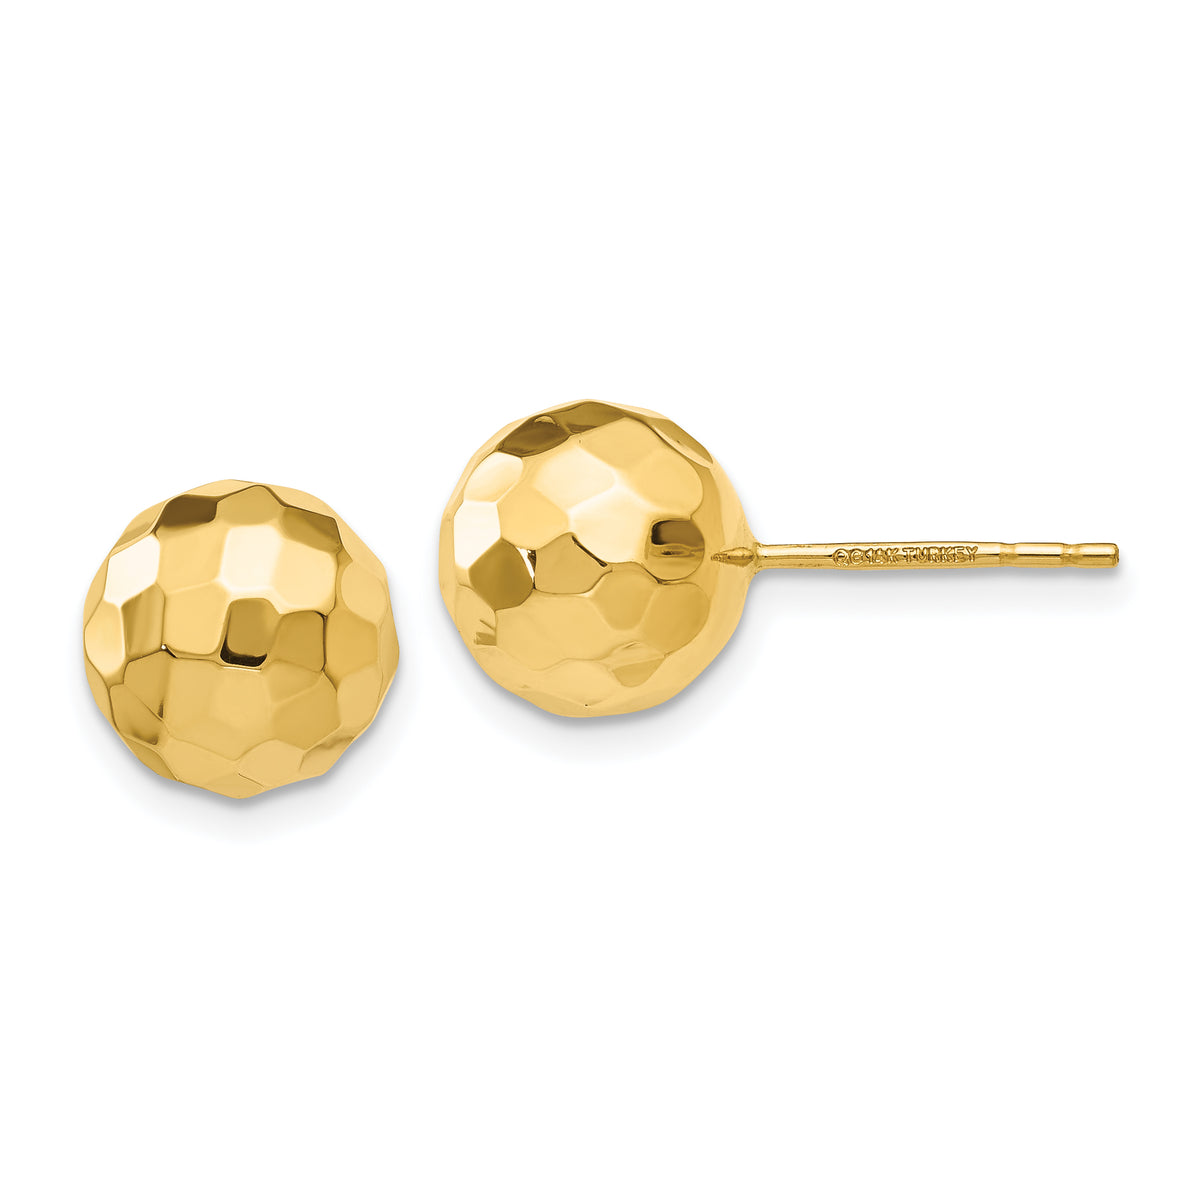 14K Gold Polished and Diamond Cut 9.5MM Ball Post Earrings